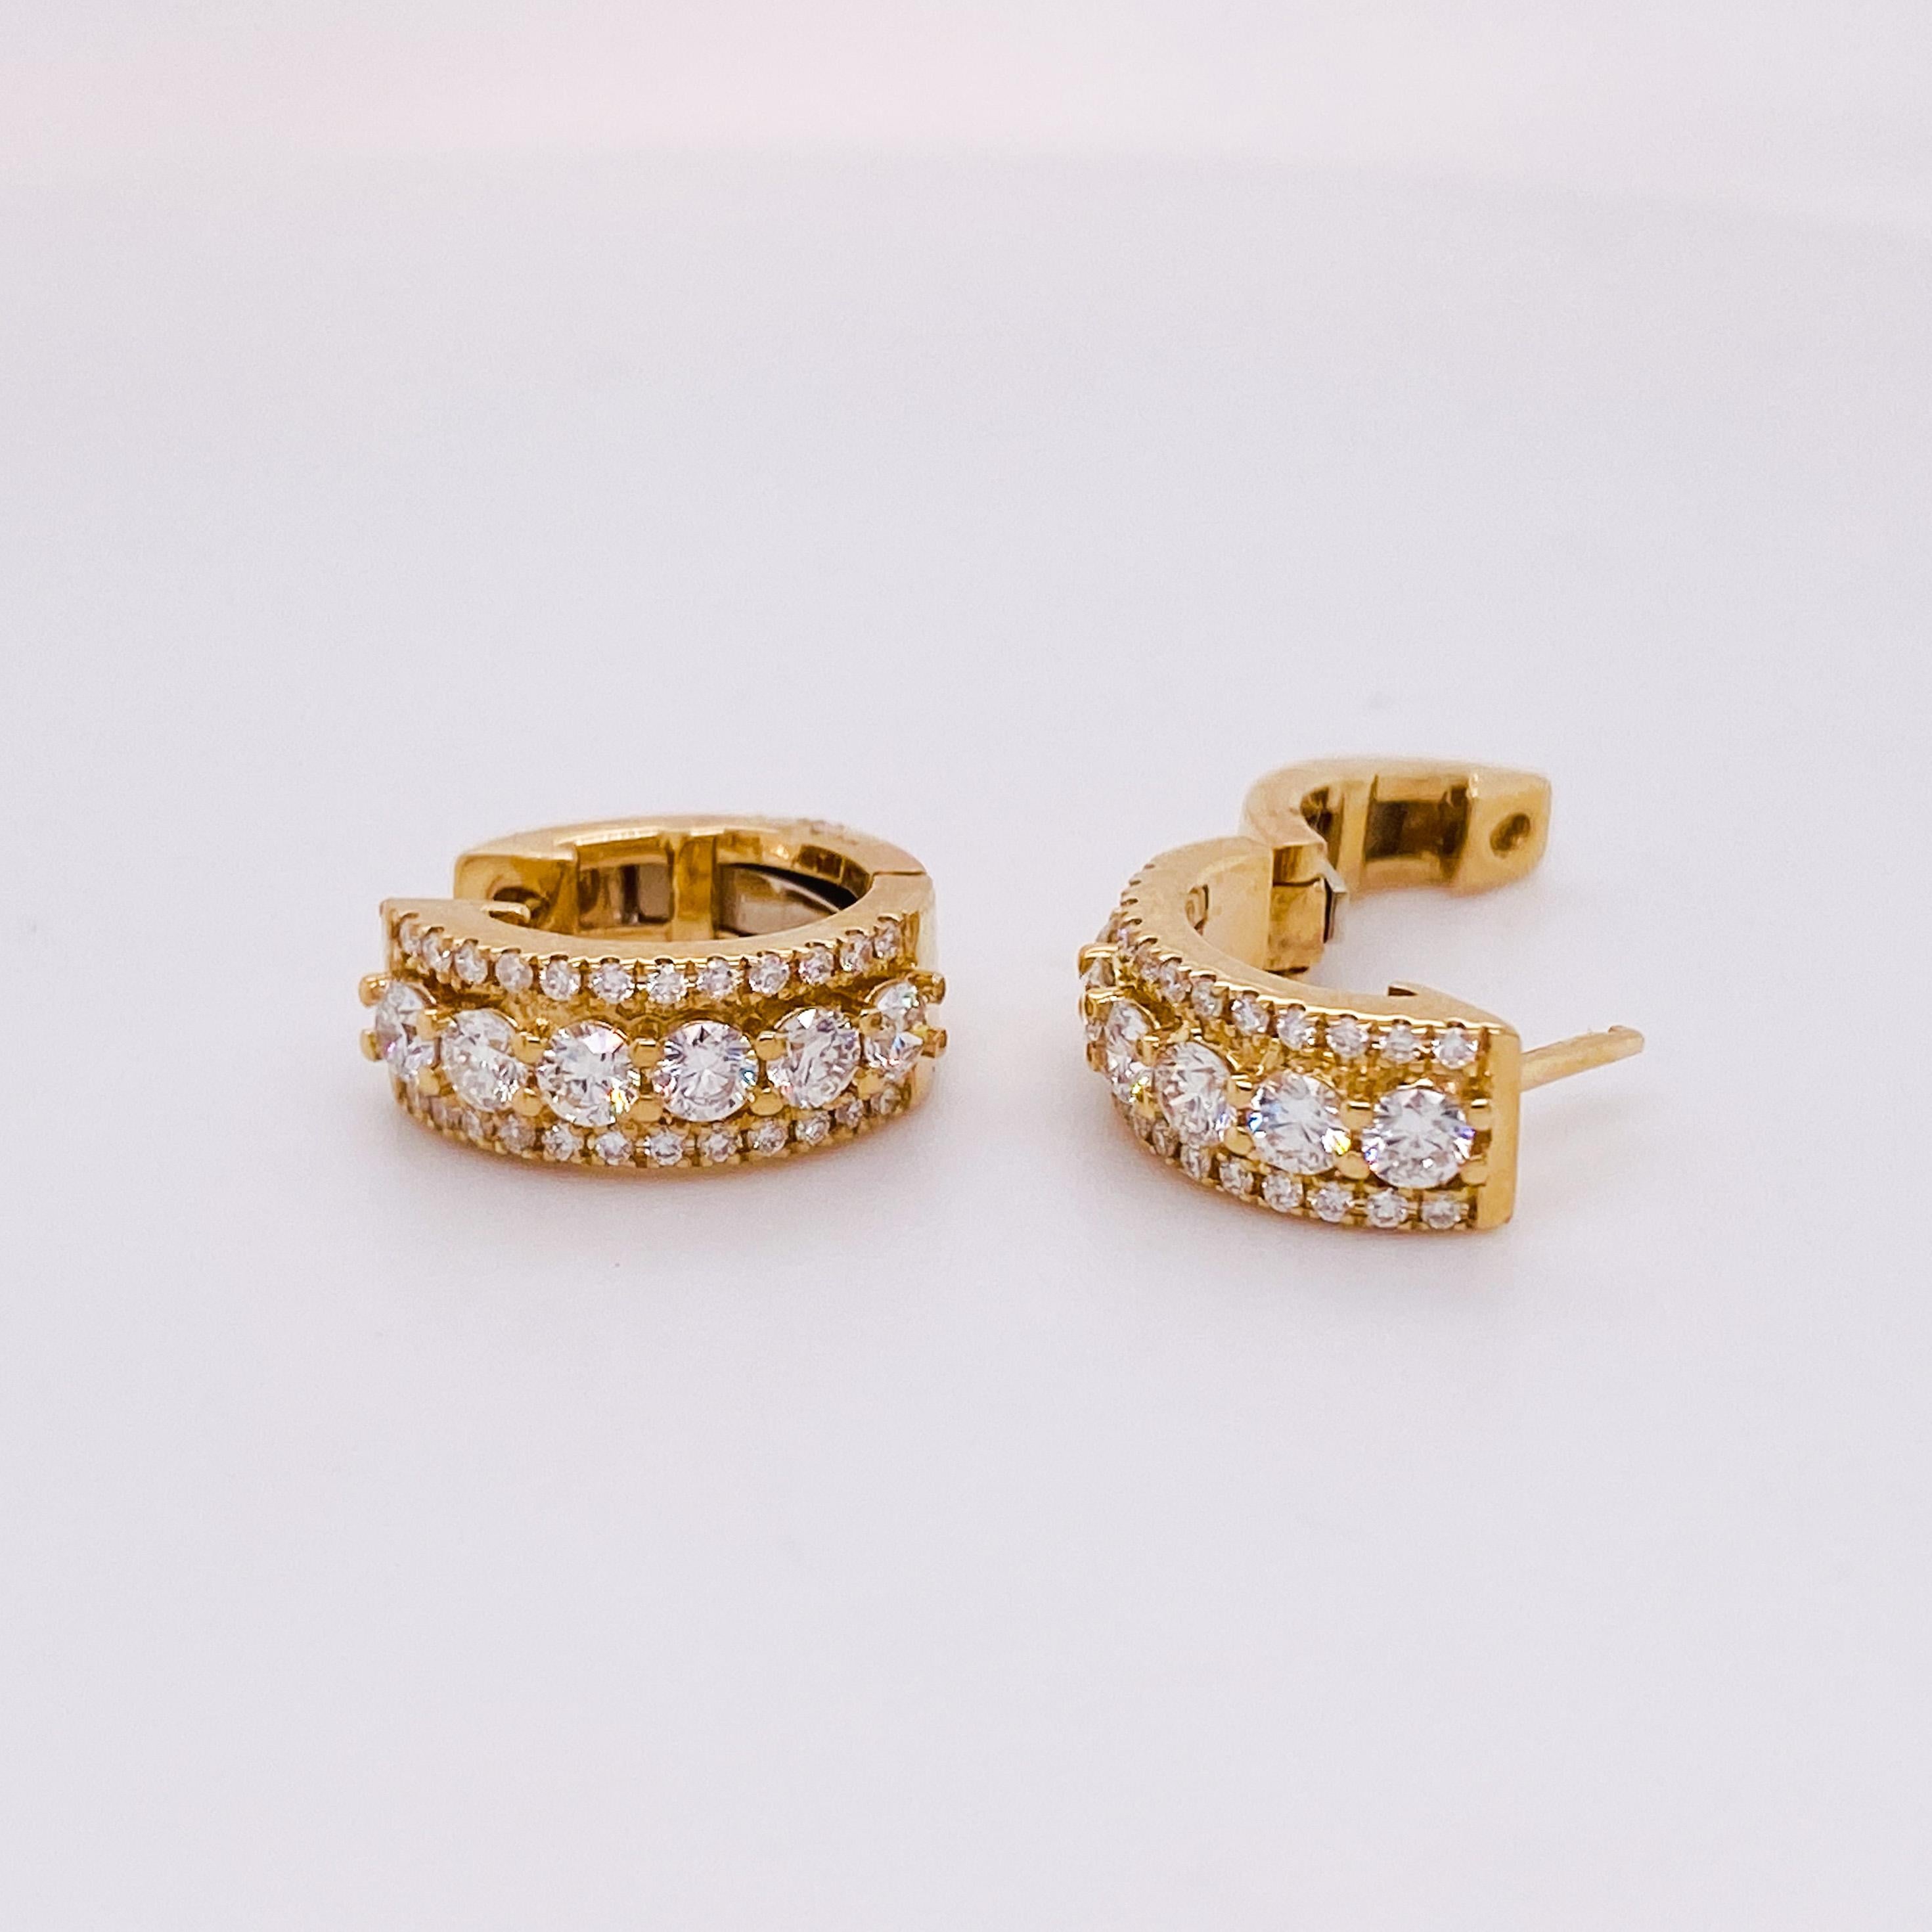 These stunning diamond hoops have unique design that are timeless and will compliment any look it is paired with. Whether you have short or long hair, these earrings will sparkle from every direction! You will love these earrings!
The details for